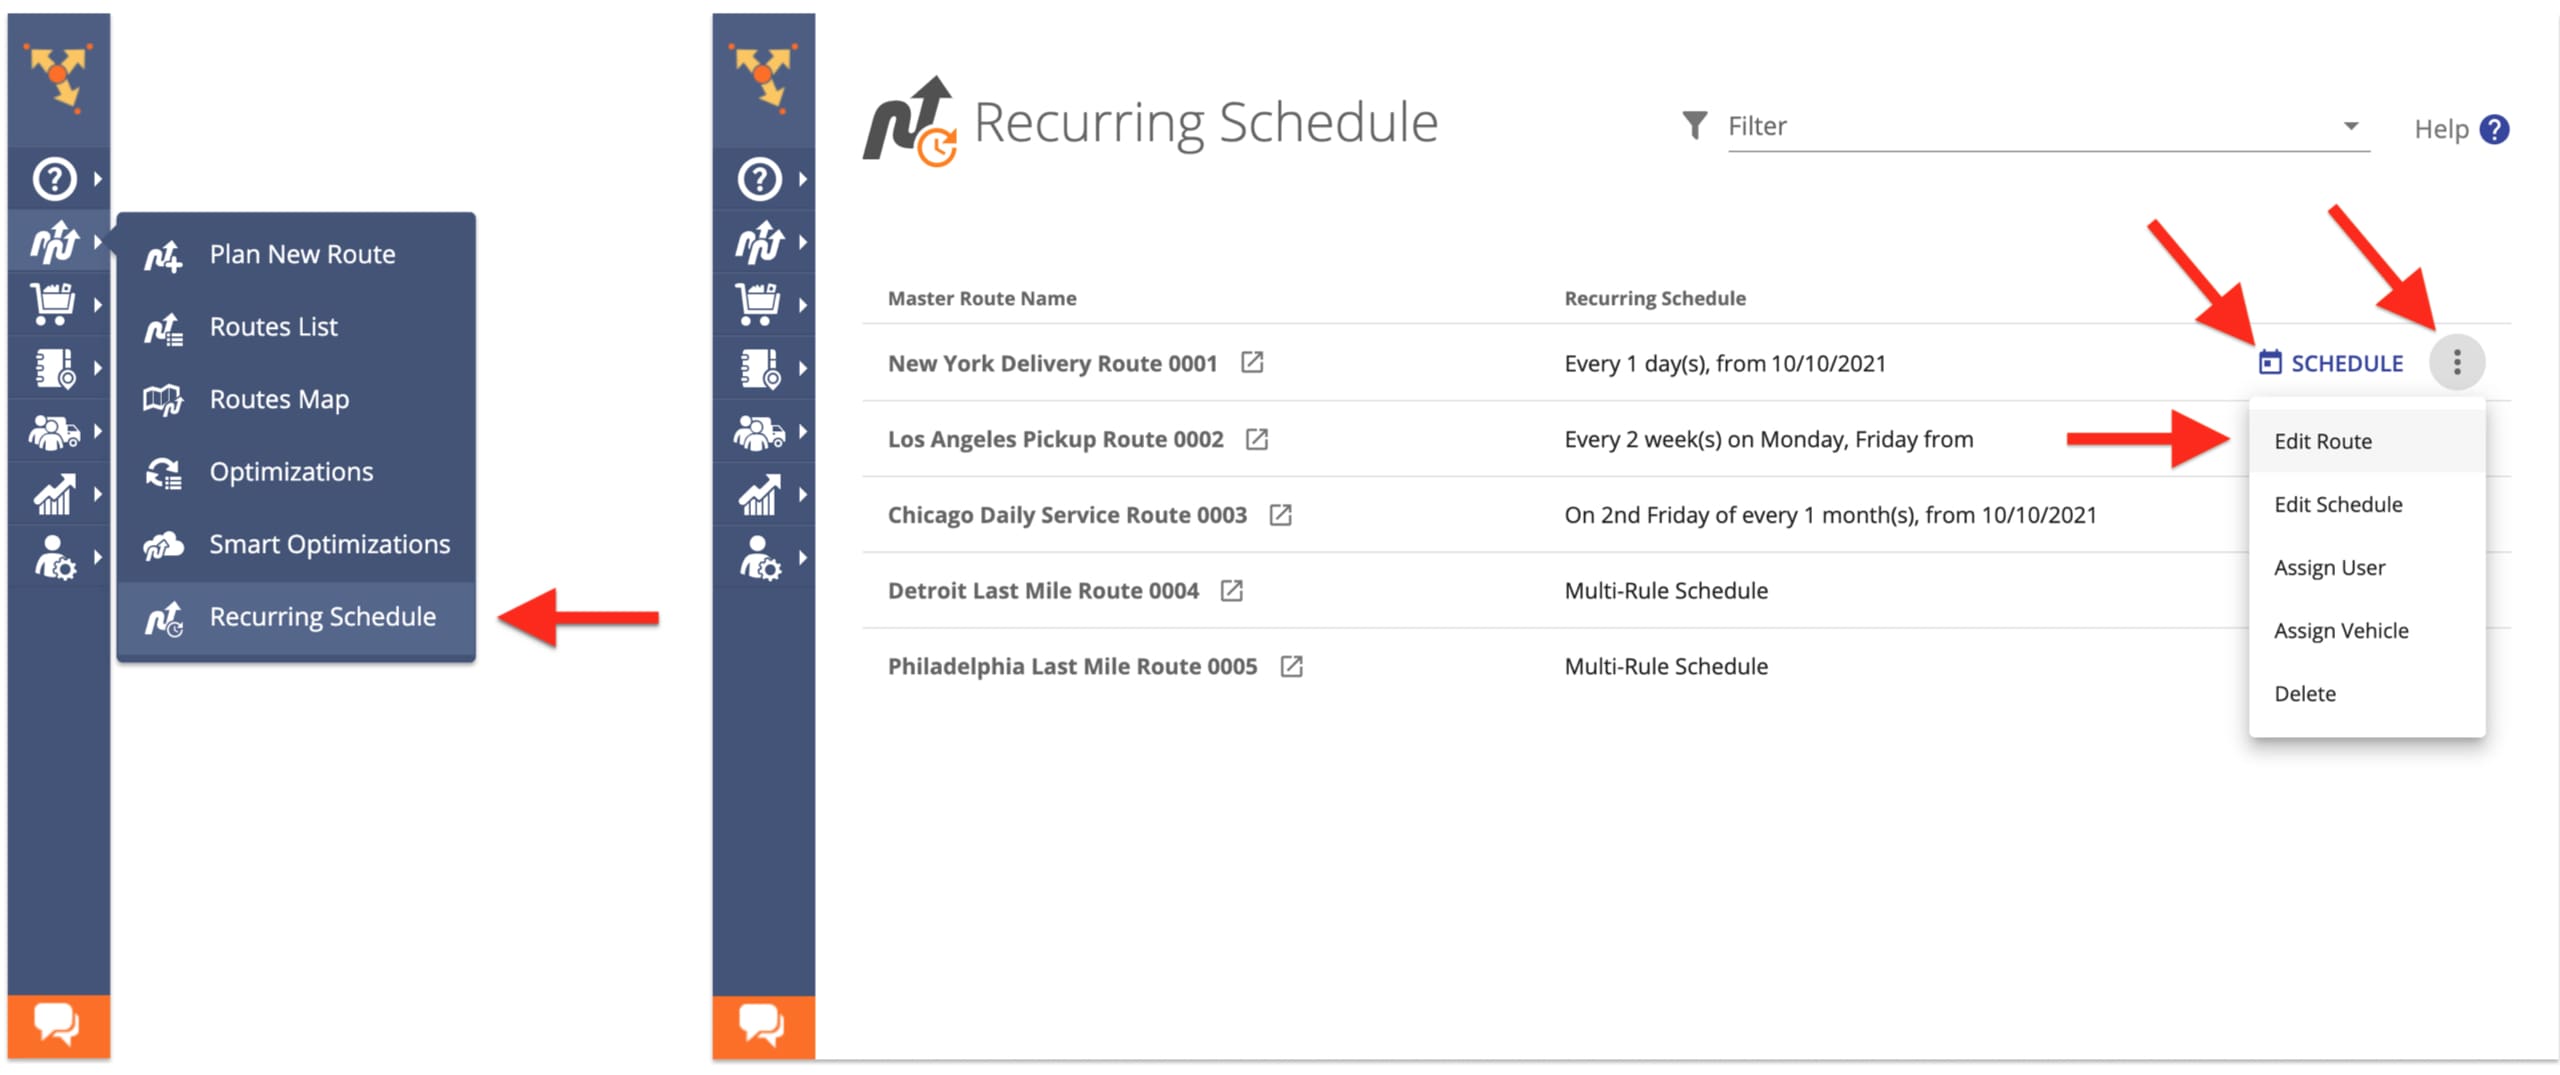 Manage Master Route templates to automatically plan recurring schedule routes per route calendar.